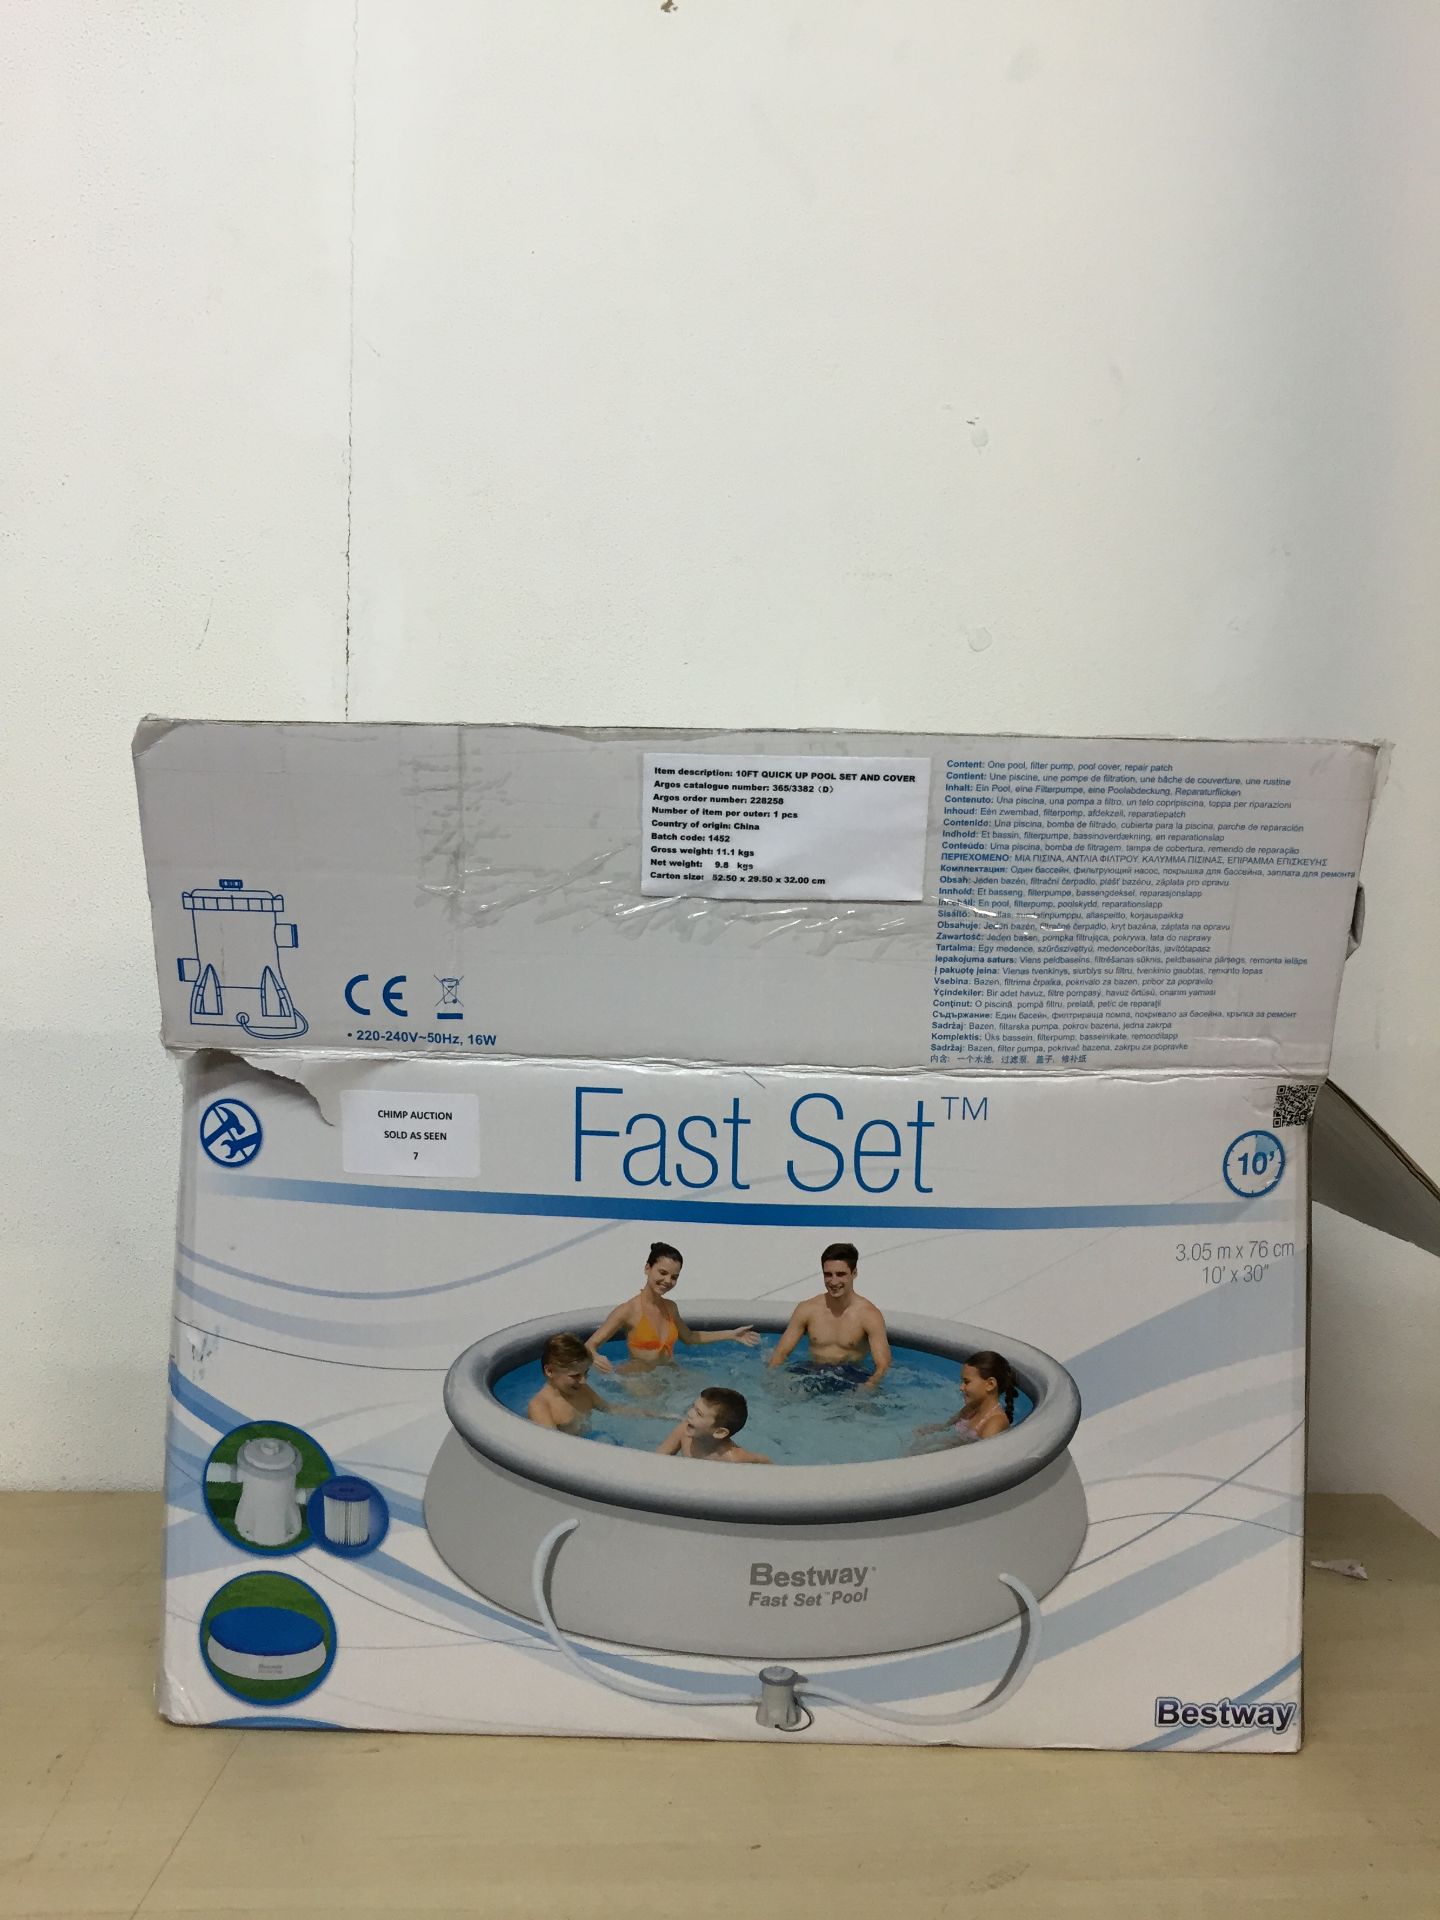 BOXED FAST SET OUT-DOOR SWIMMING POOL RRP £89.99